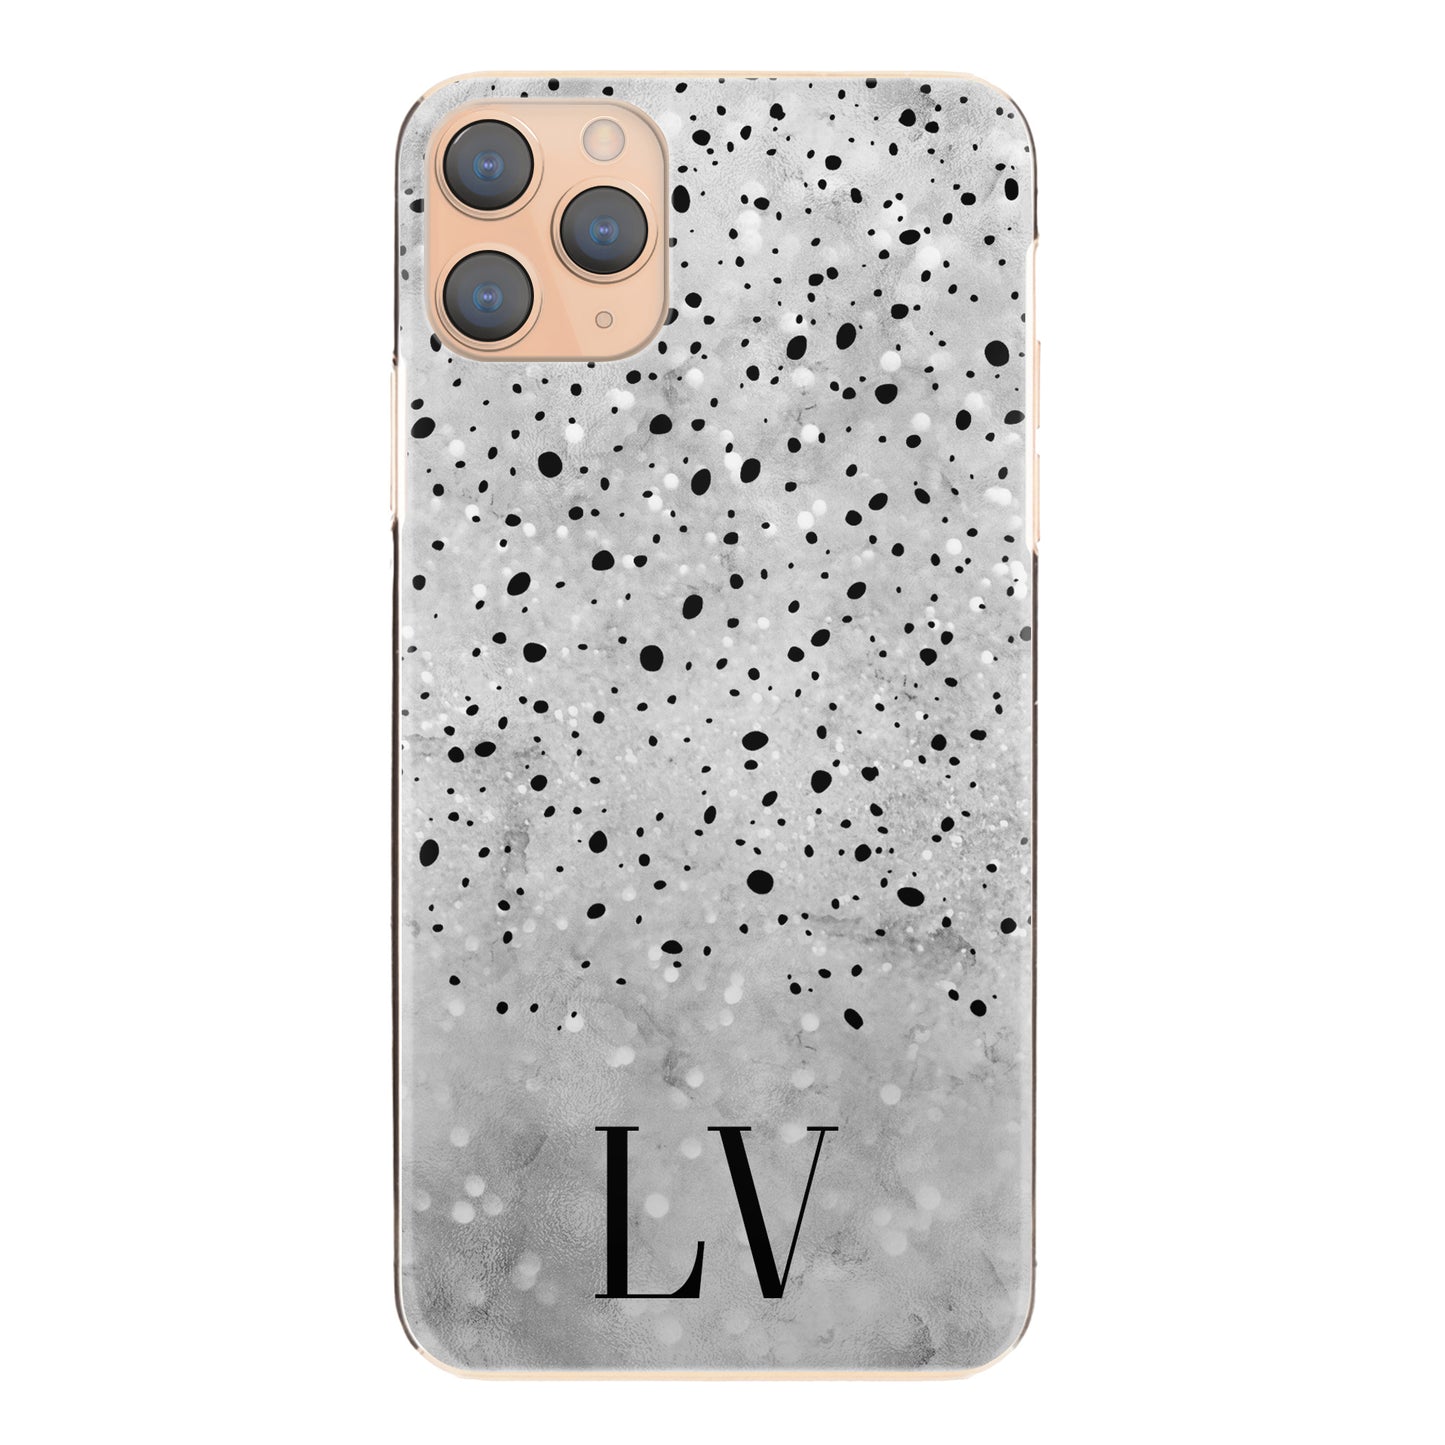 Personalised Honor Phone Hard Case with Classy Initials on Textured Grey and Black Dots